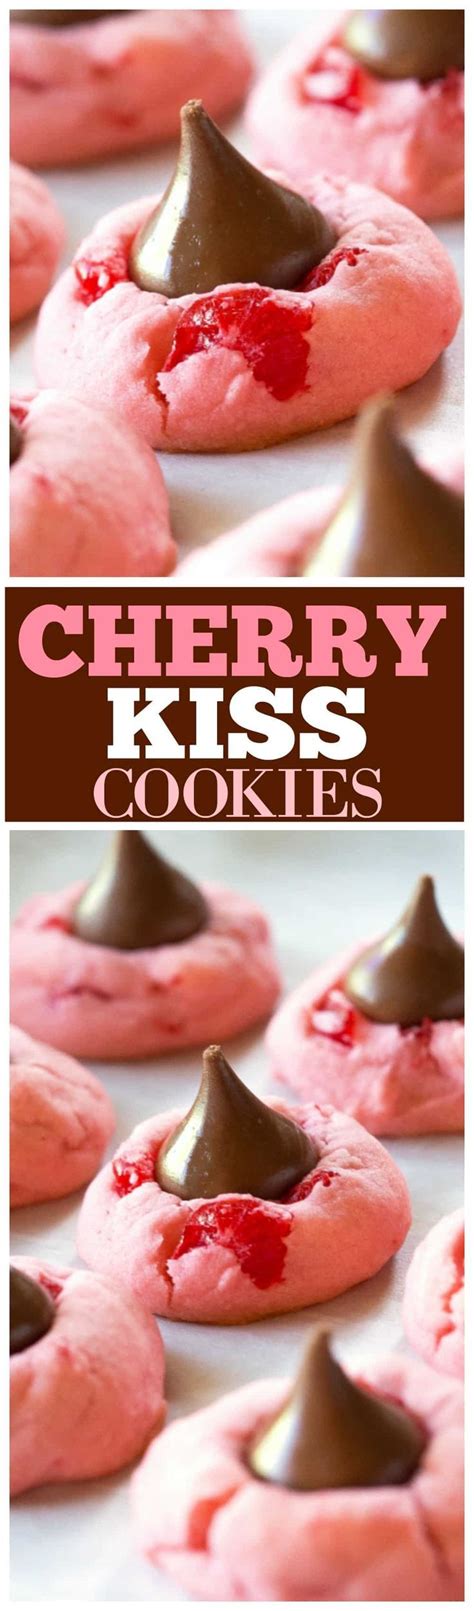 It's not christmas without these peanut butter blossoms cookies. Cherry Kiss Cookies | Recipe | Kiss cookies, Food recipes ...